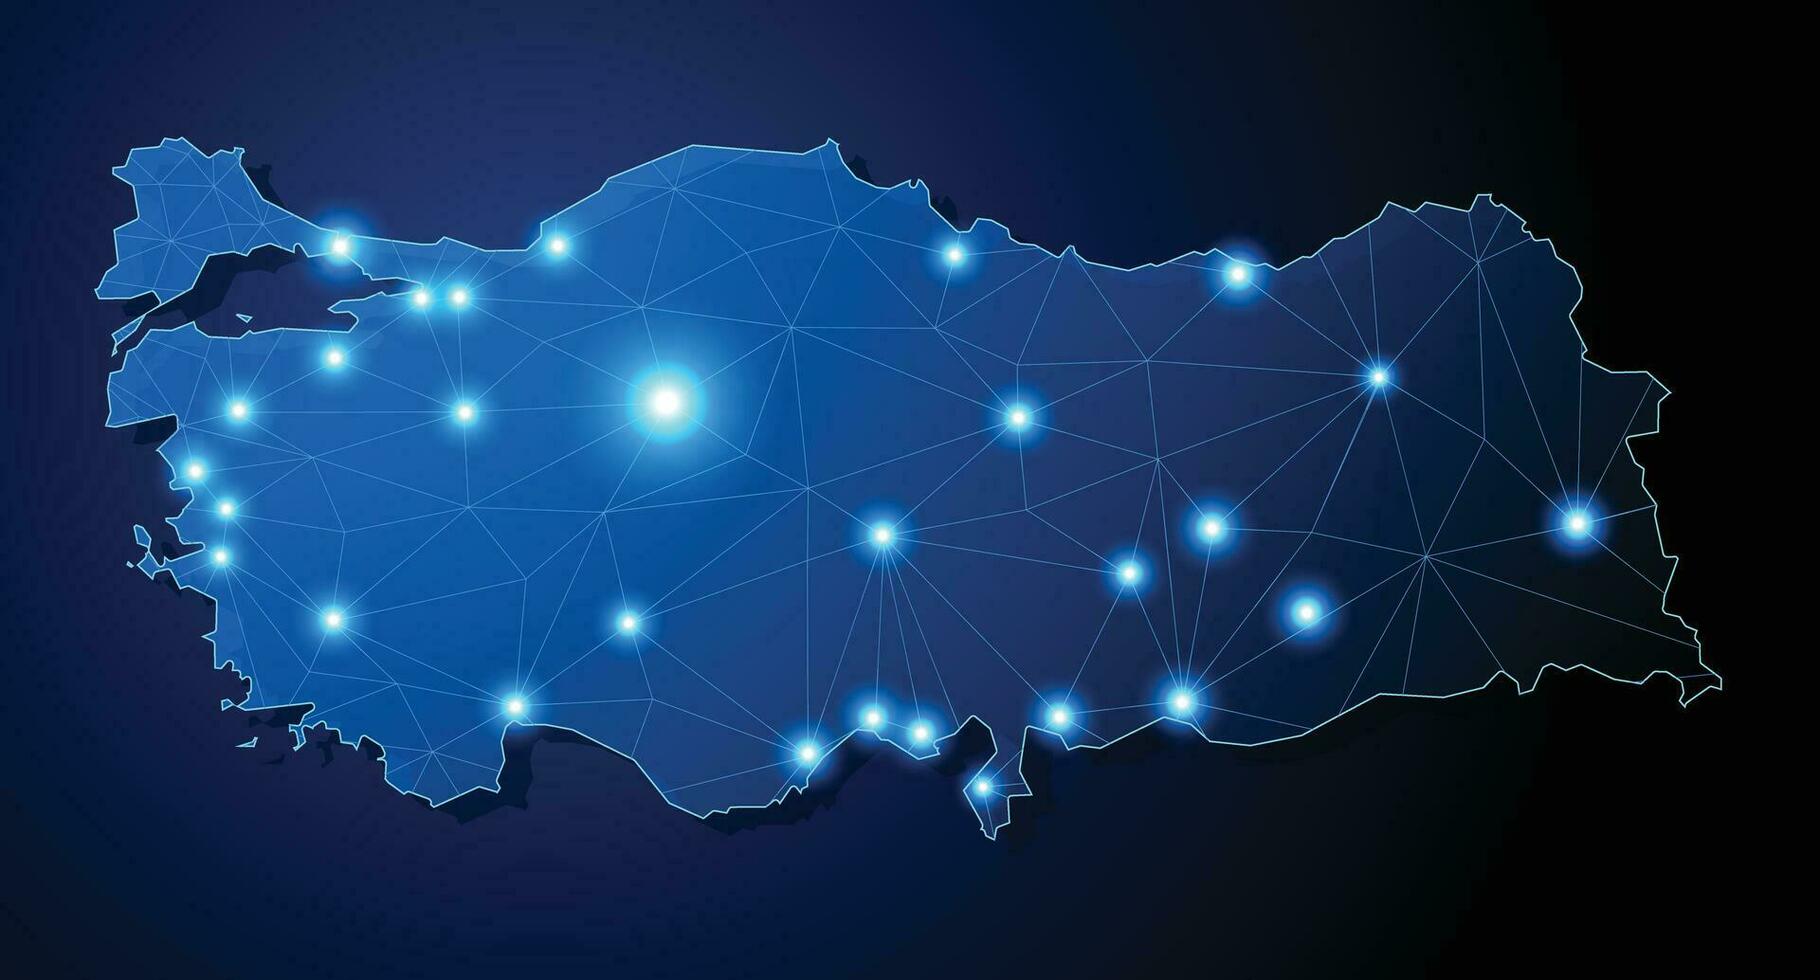 Turkey - Country Shape with Lines Connecting Major Cities vector